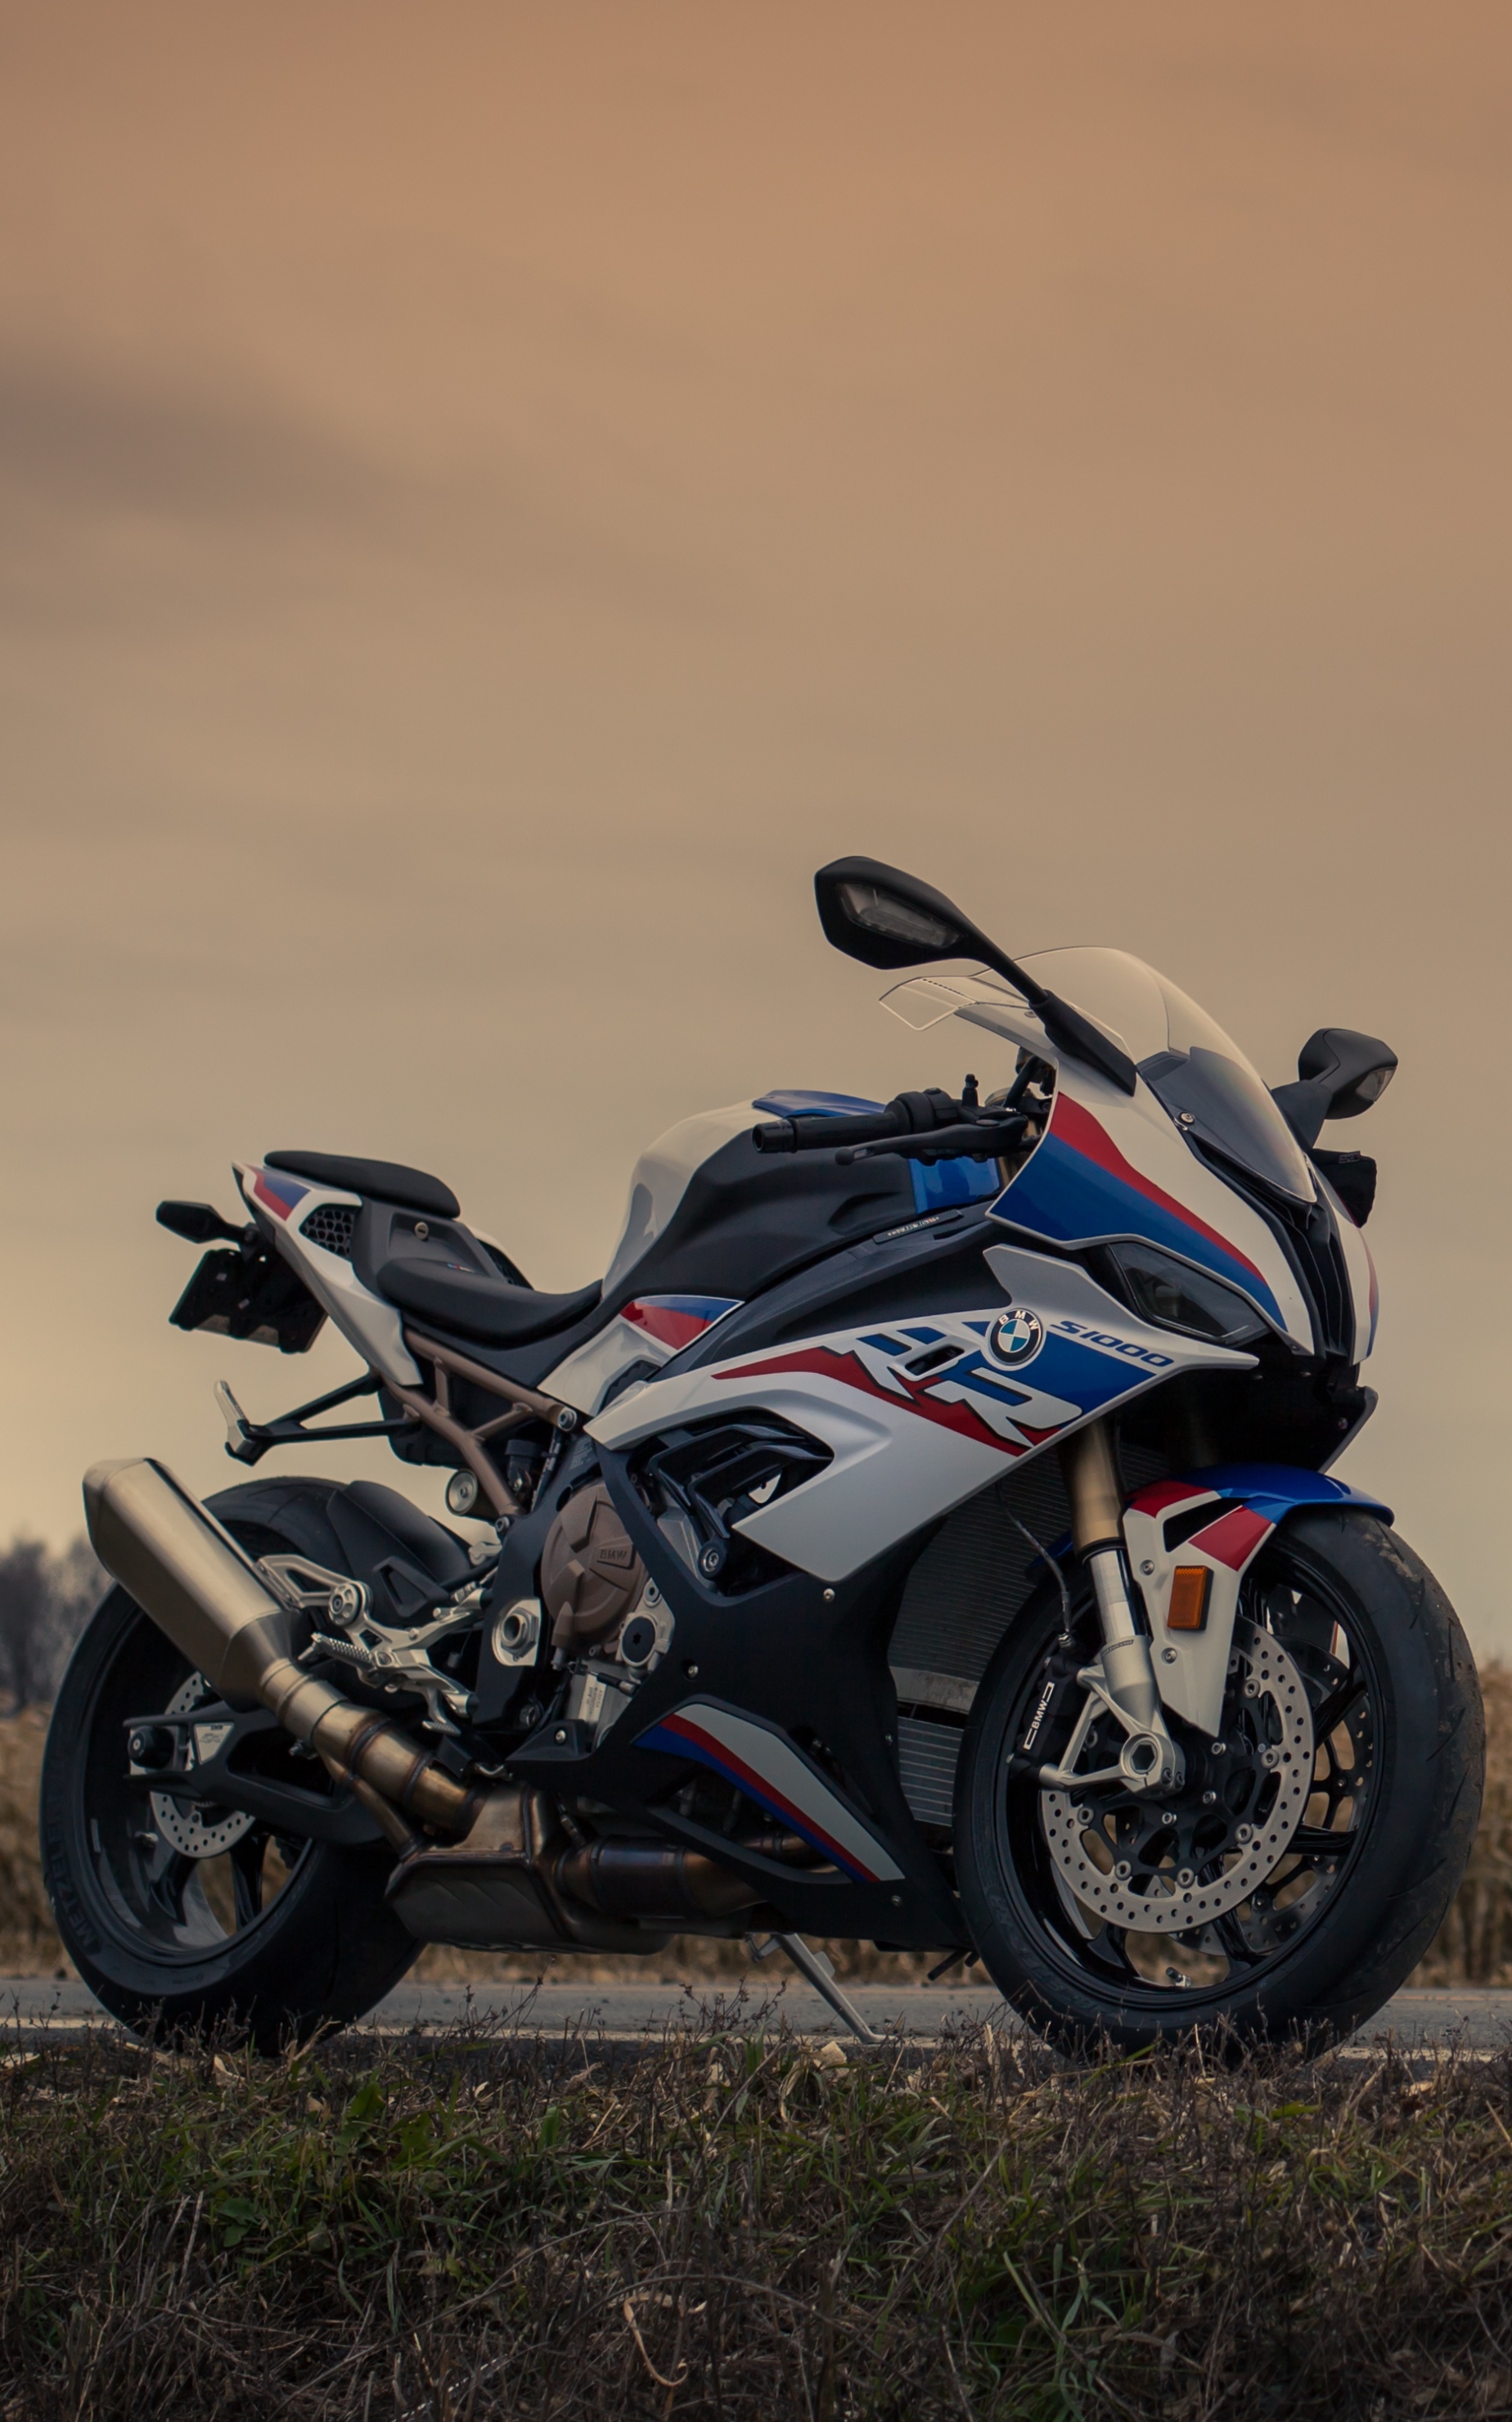 BMW S1000RR wallpaper by Lbz69 - Download on ZEDGE™ | 7ddb